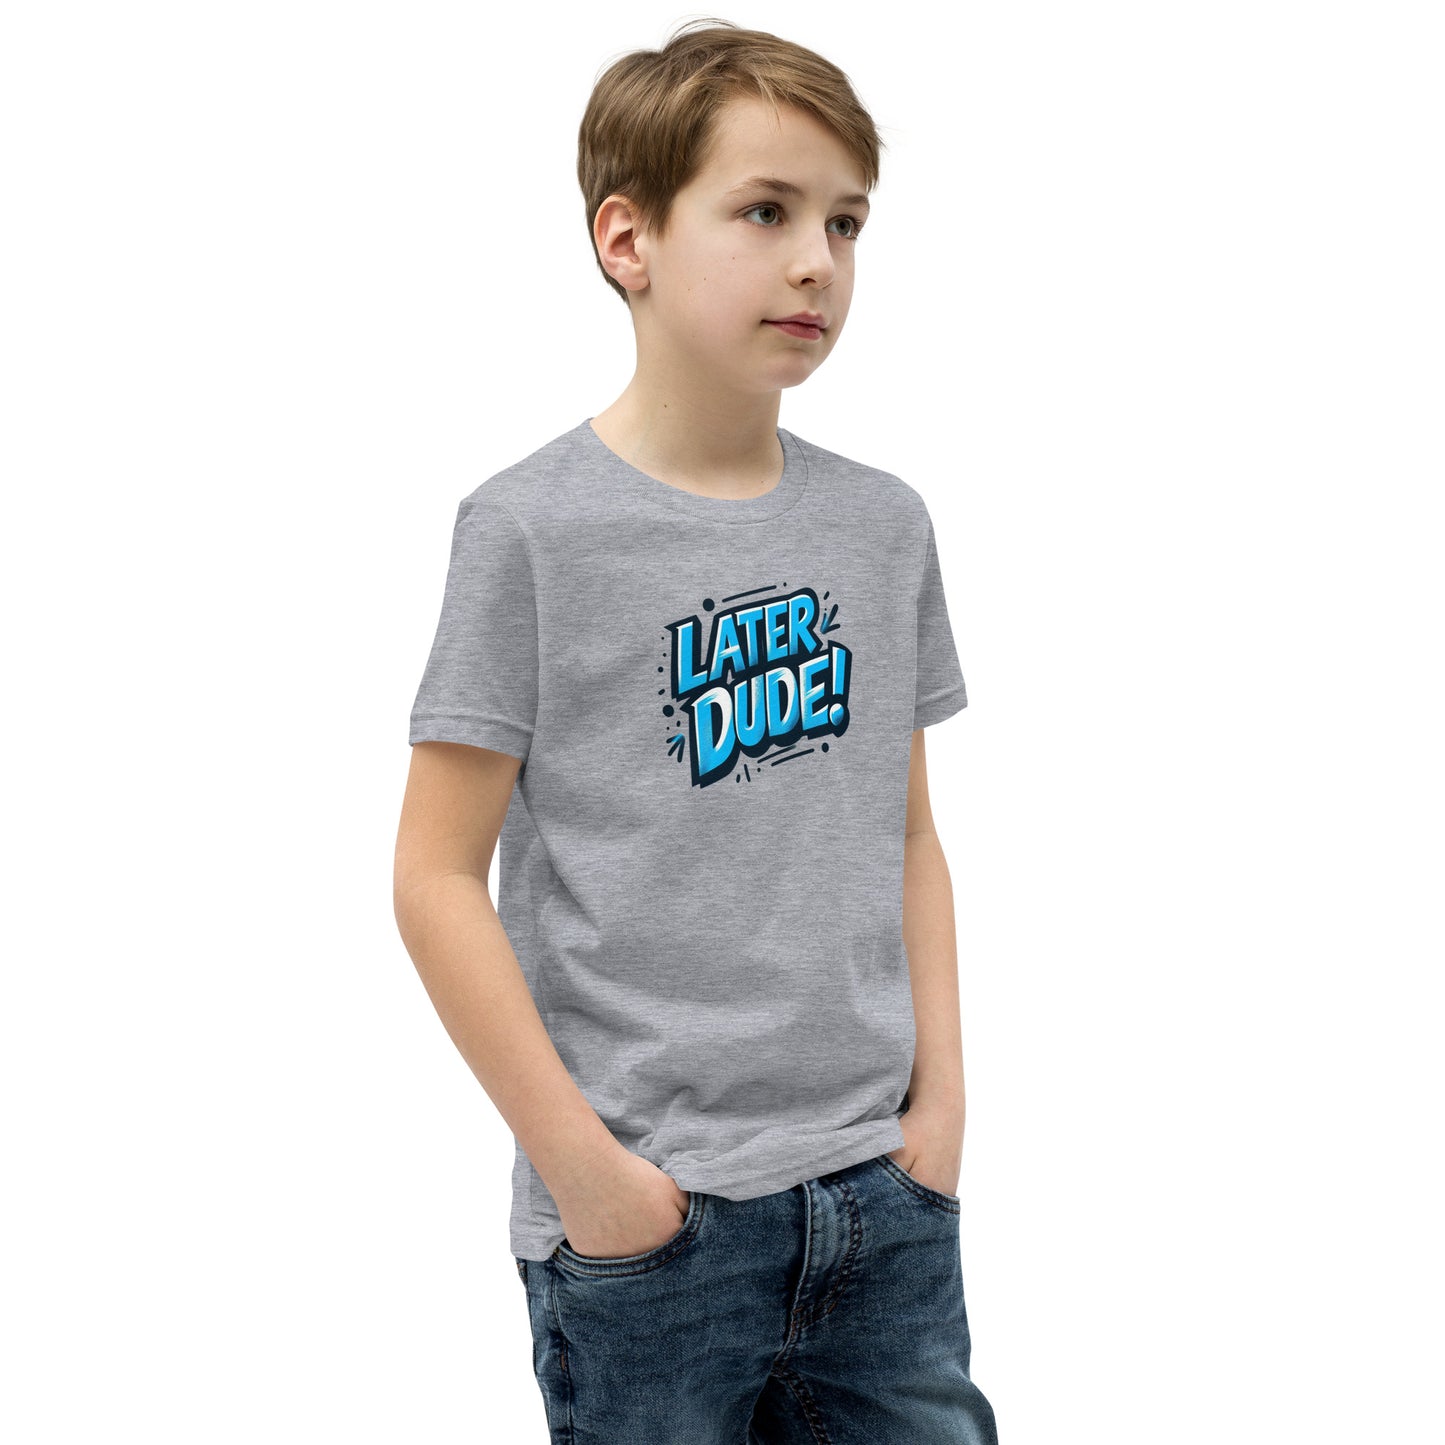 Later Dude Youth Short Sleeve T-Shirt